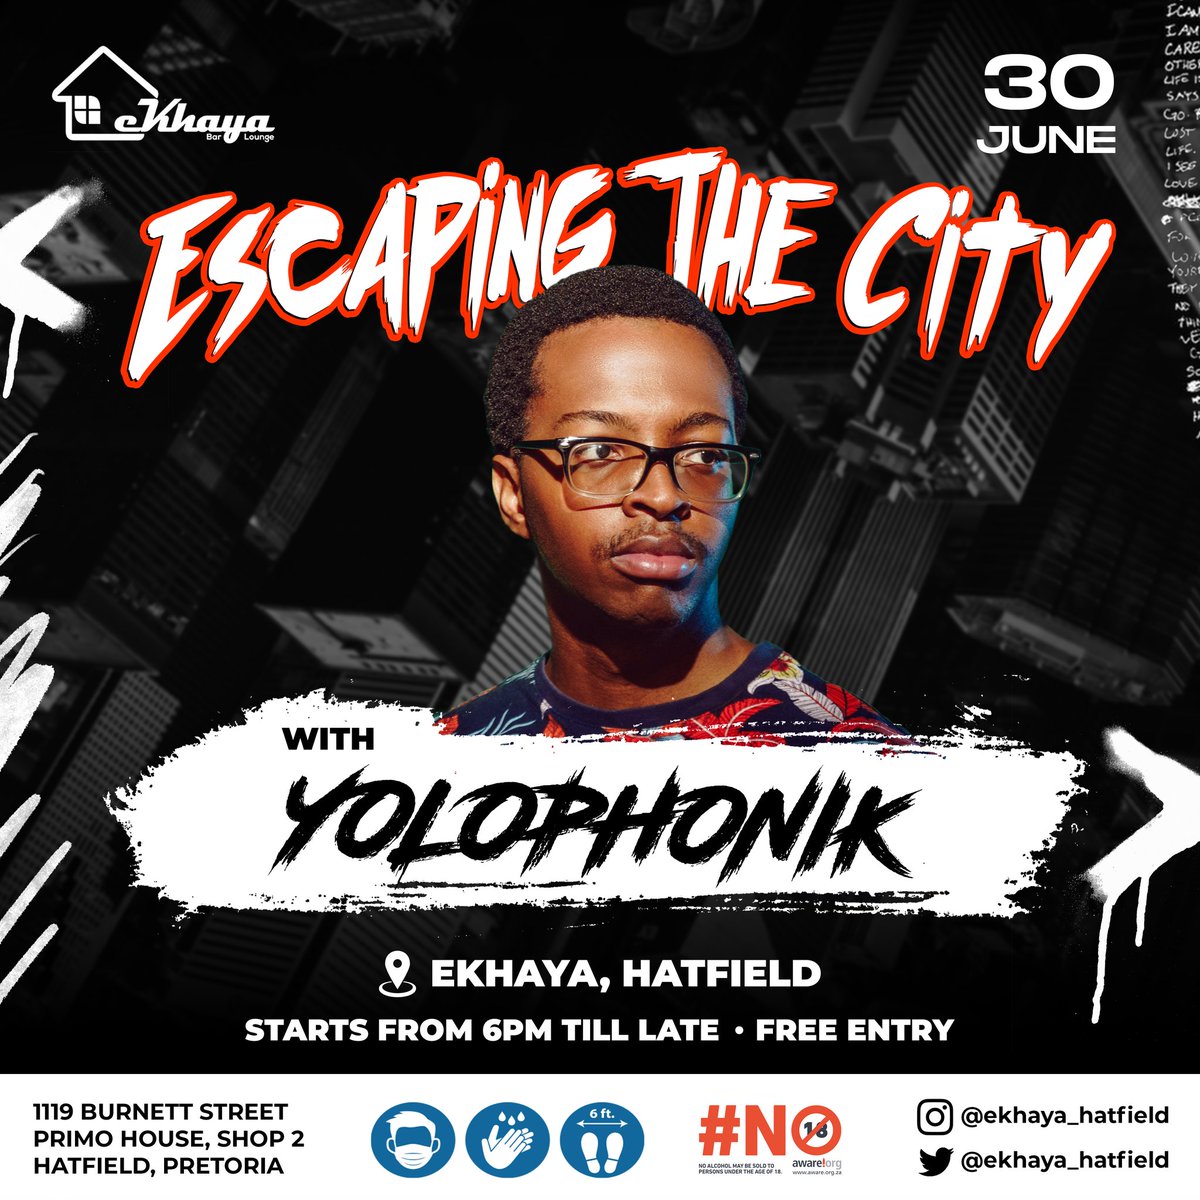 OUR 2ND HEADLINE ACT IS ALSO A PTA NATIVE WHO HAS CAUGHT OUR EARS WITH HIS ABILITY TO CREATE AMAZING FLIPS AND EXCEPTIONAL PRODUCTION. WE PRESENT TO YOU @Yolophonik 30 JUNE • SAVE THE DATE